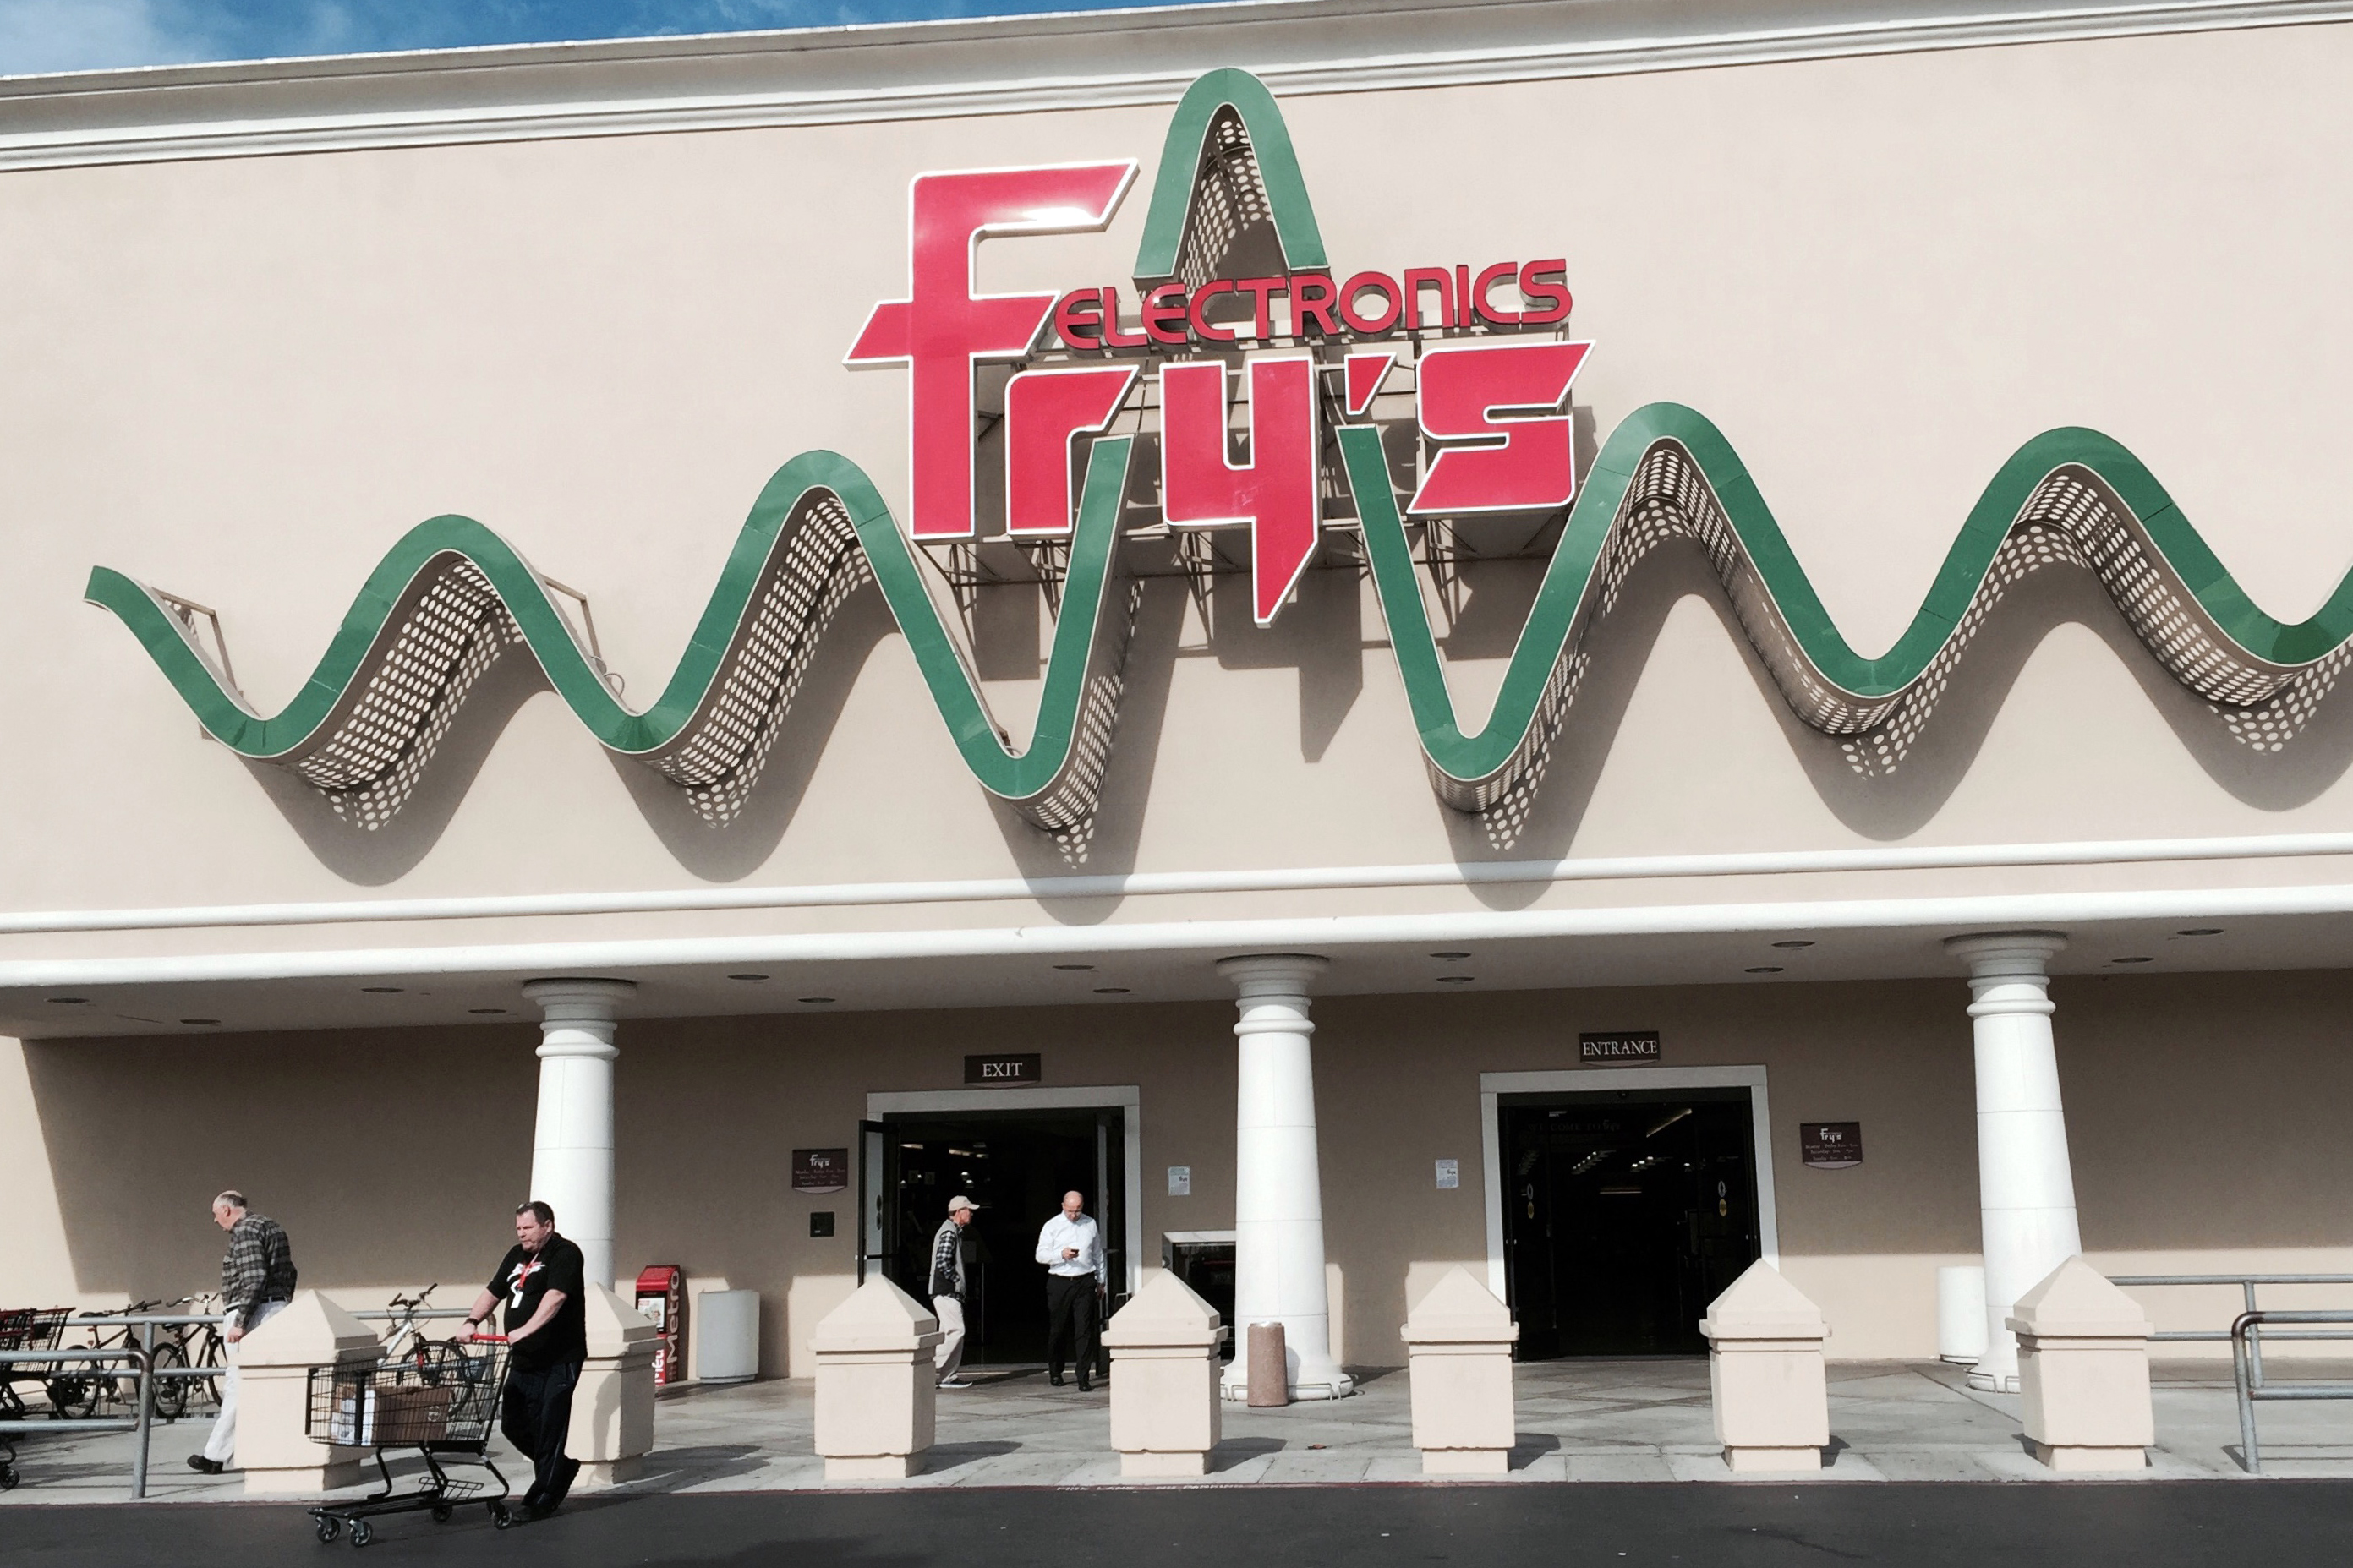 Fry's Electronics flagship store in Sunnyvale, California, USA, is a Silicon Valley institution, specializes in computers, computer components, and home entertainment.